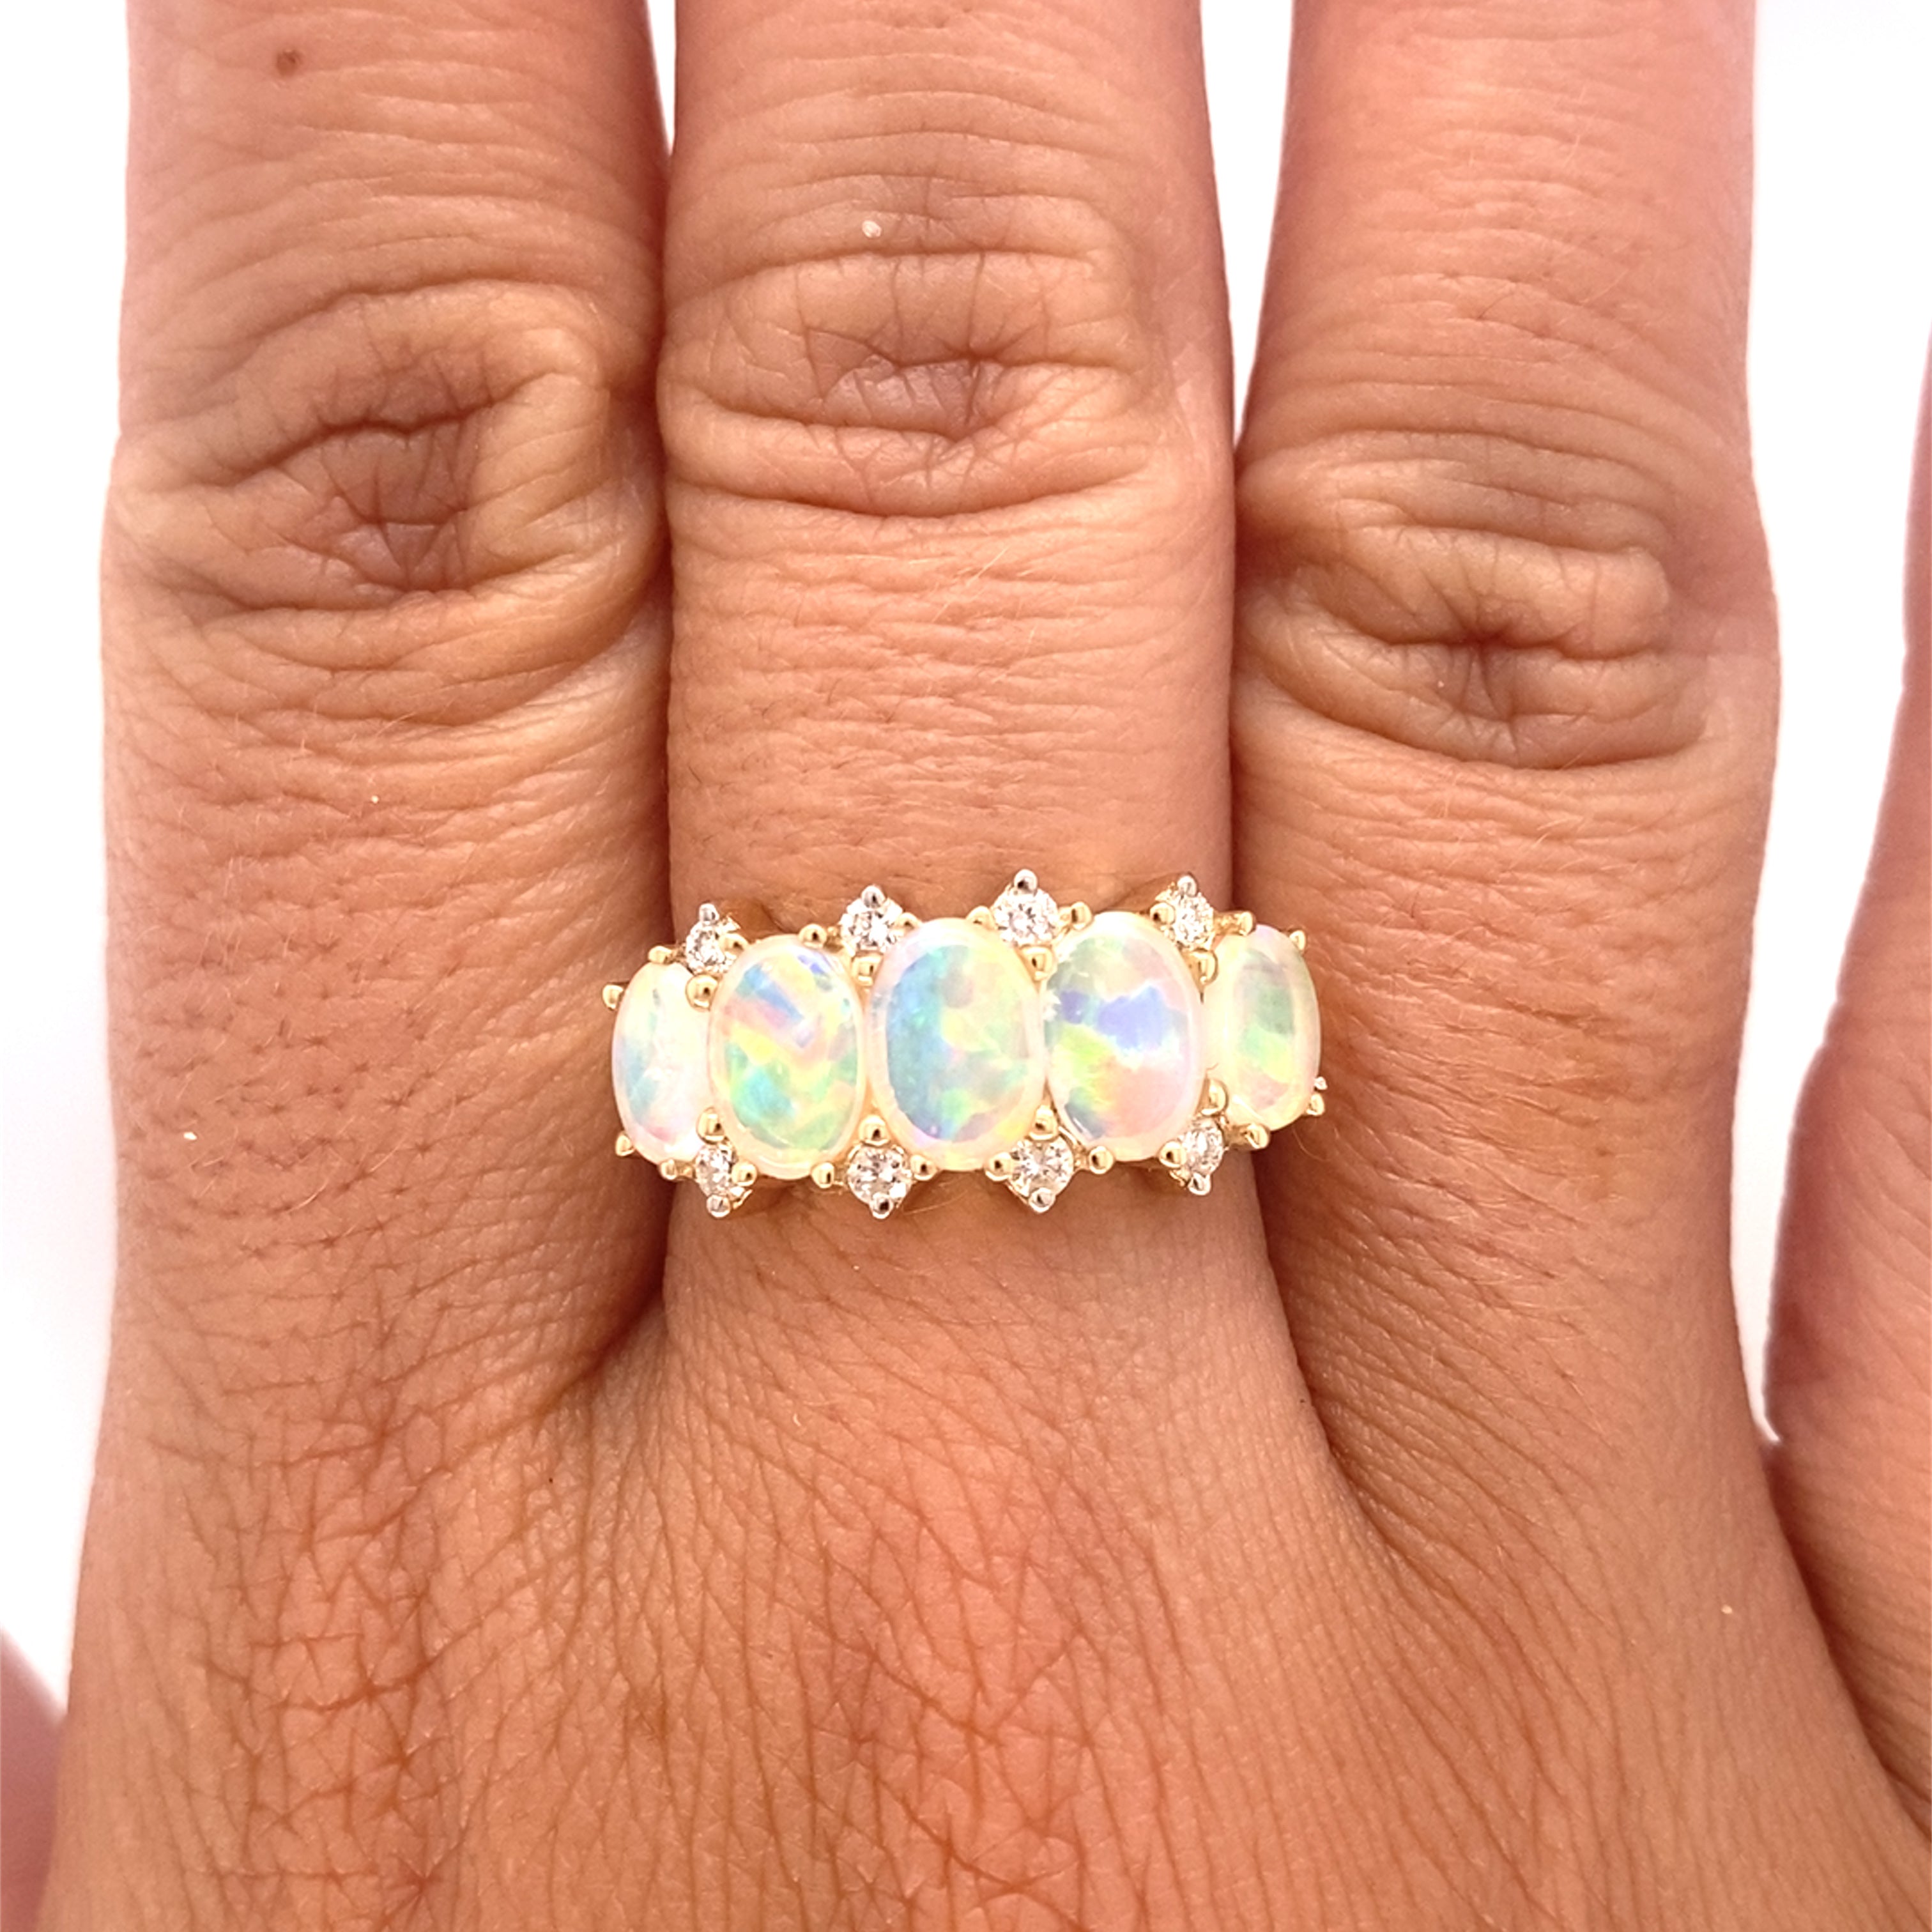 A fire within: What you need to know about Aussie Opals